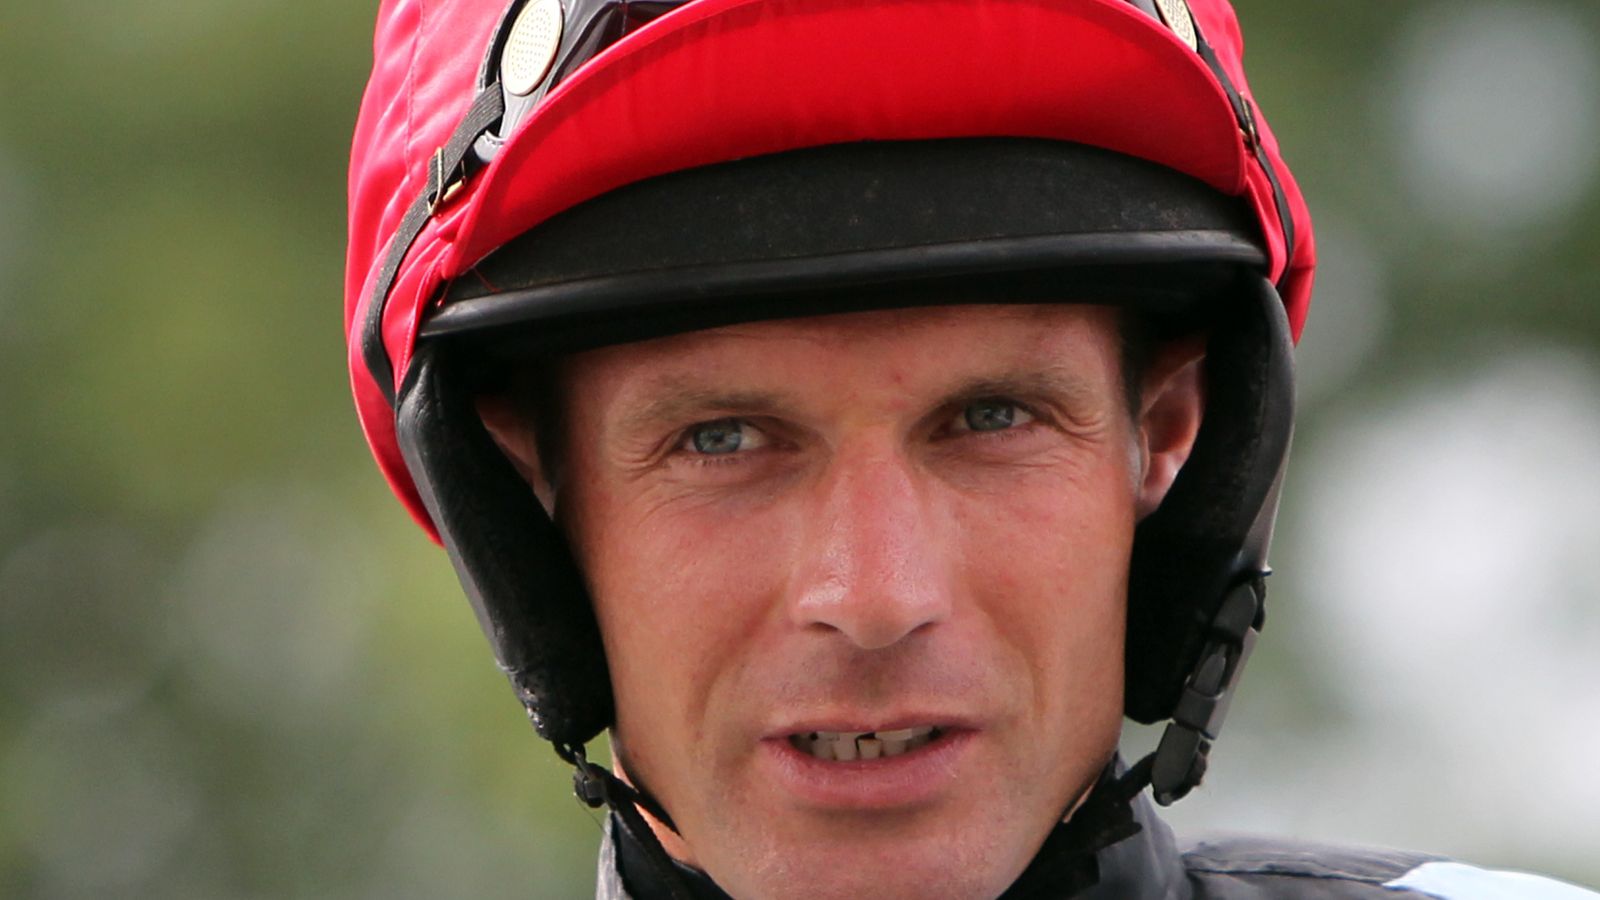 Danny Cook National Hunt Jockey Forced Into Retirement Over Sight Loss Fear After Serious Eye